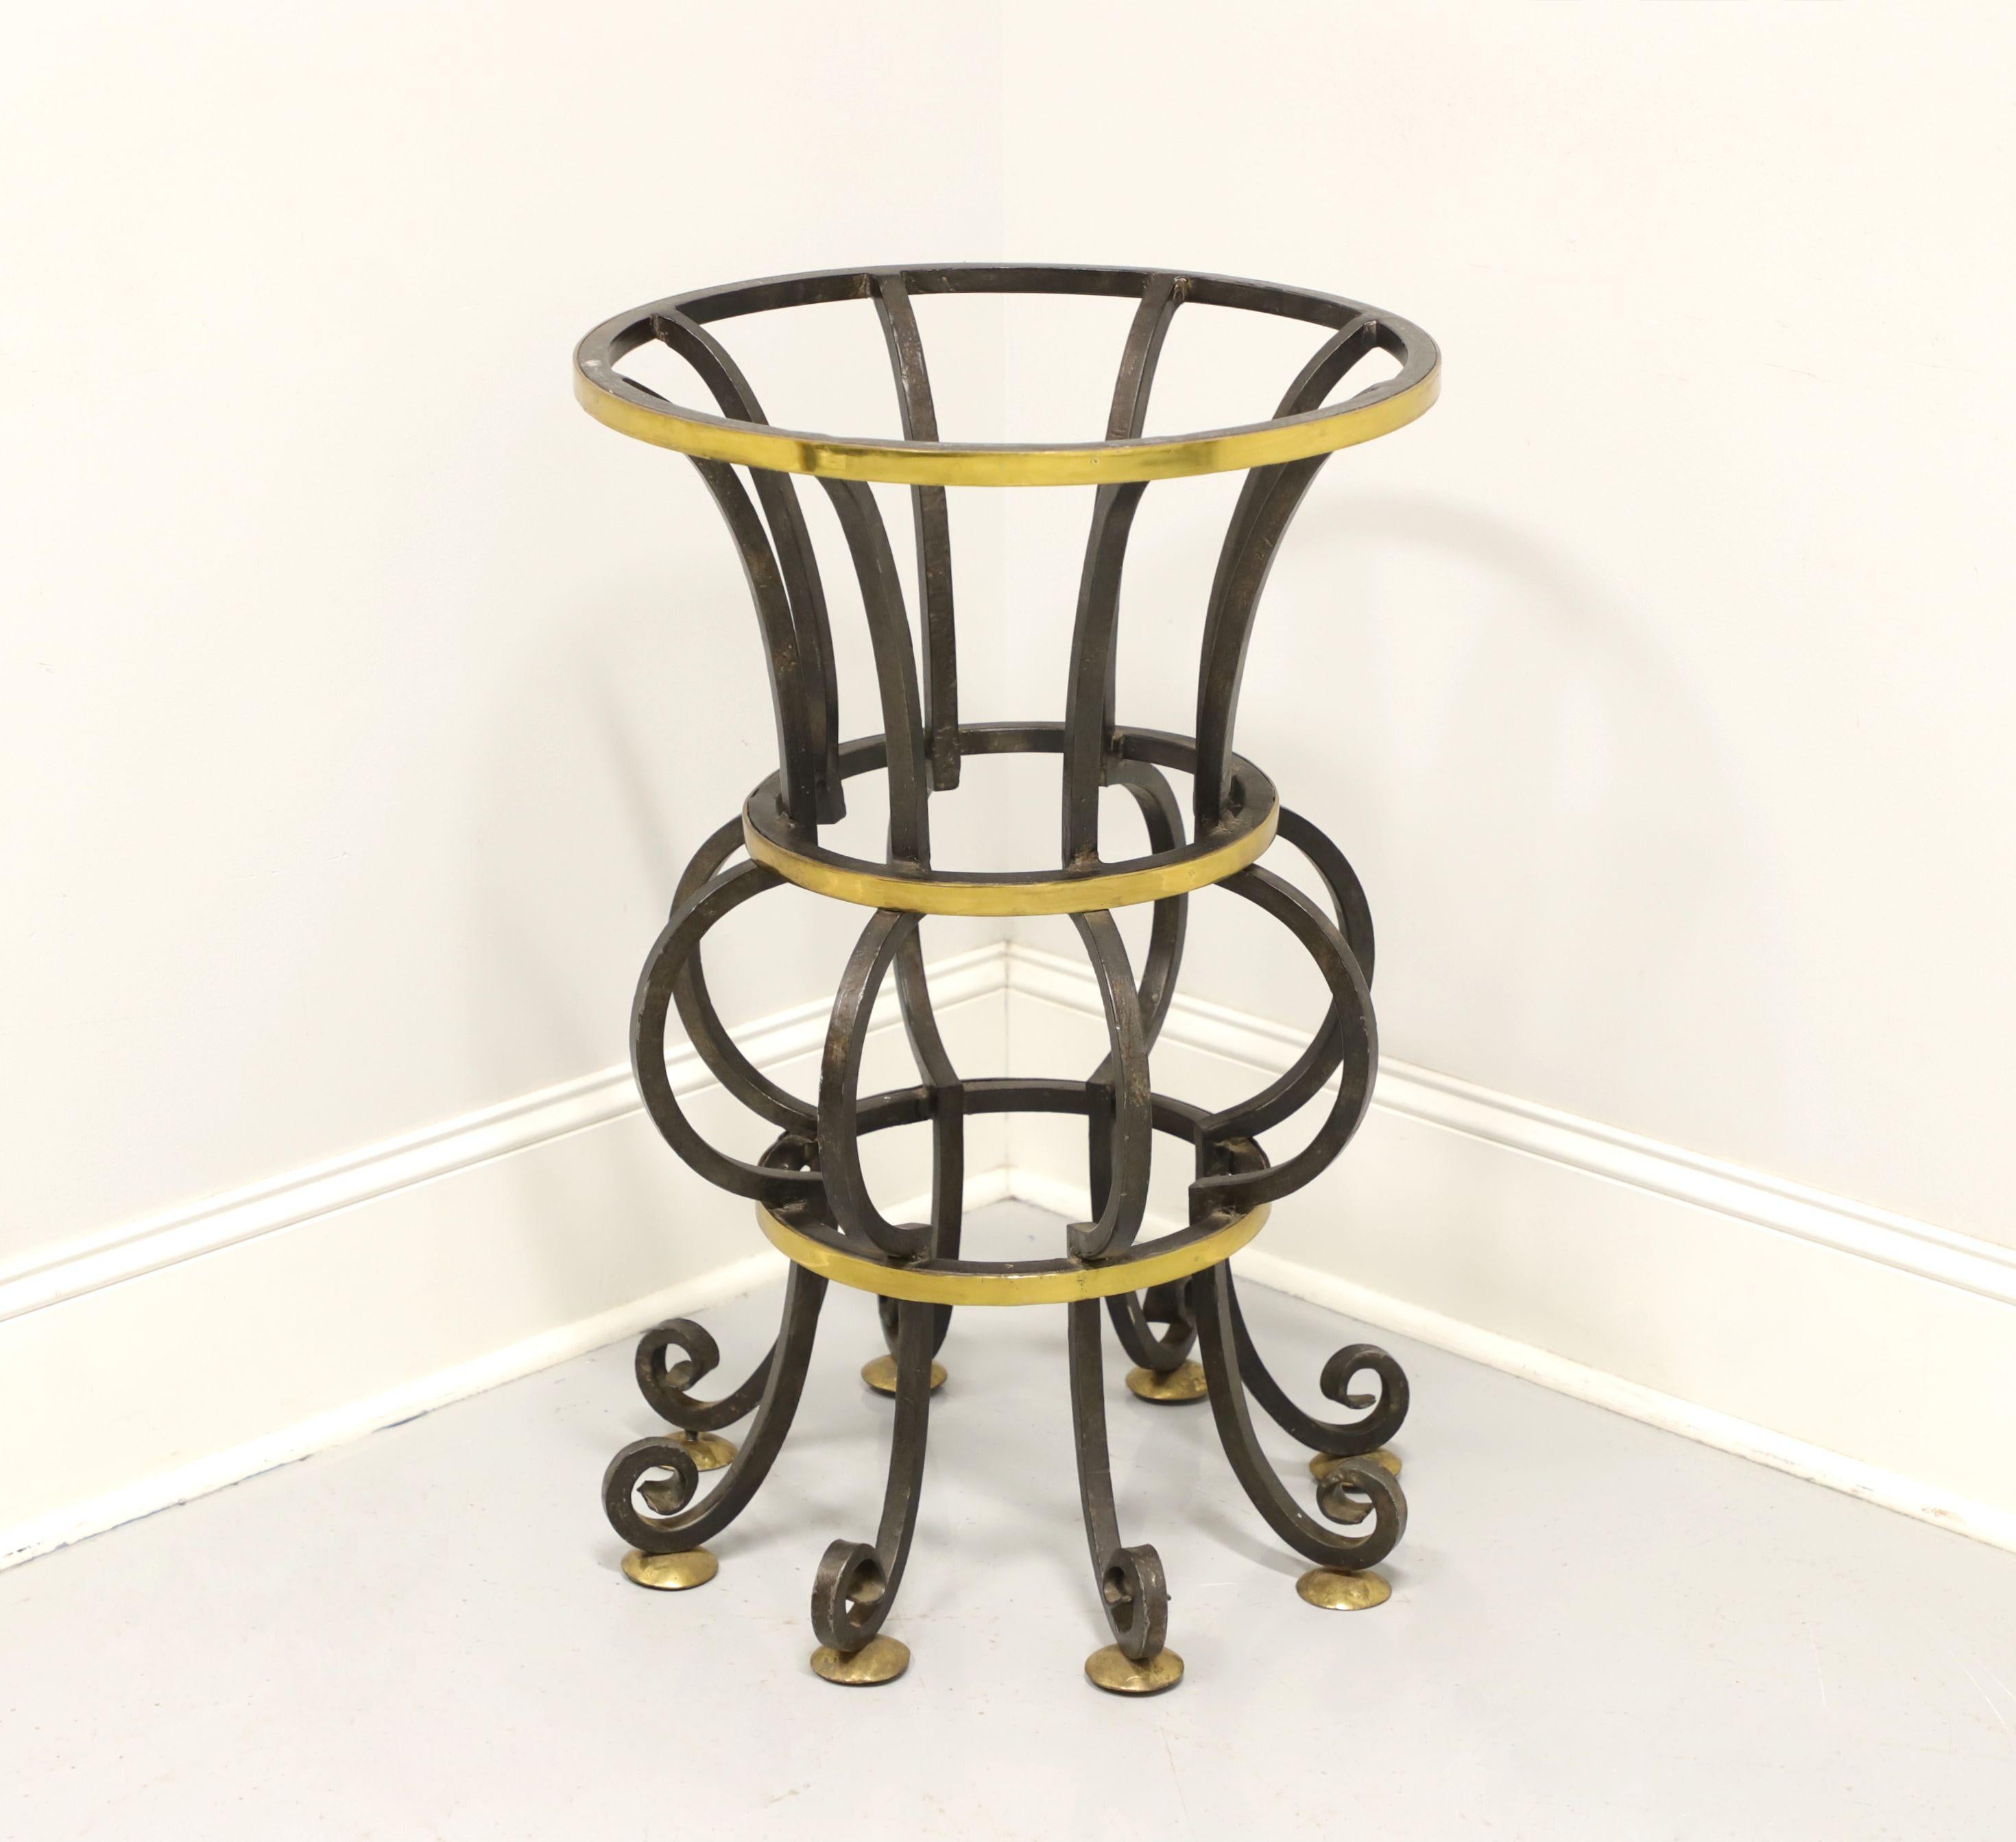 A Contemporary style table base for a glass top, unbranded. Wrought iron with deocrative brass accents in an urn like design. Ready for your style of round glass table top. Likely made in the USA, in the mid 20th Century.

Measures: 20.25 W 20.25